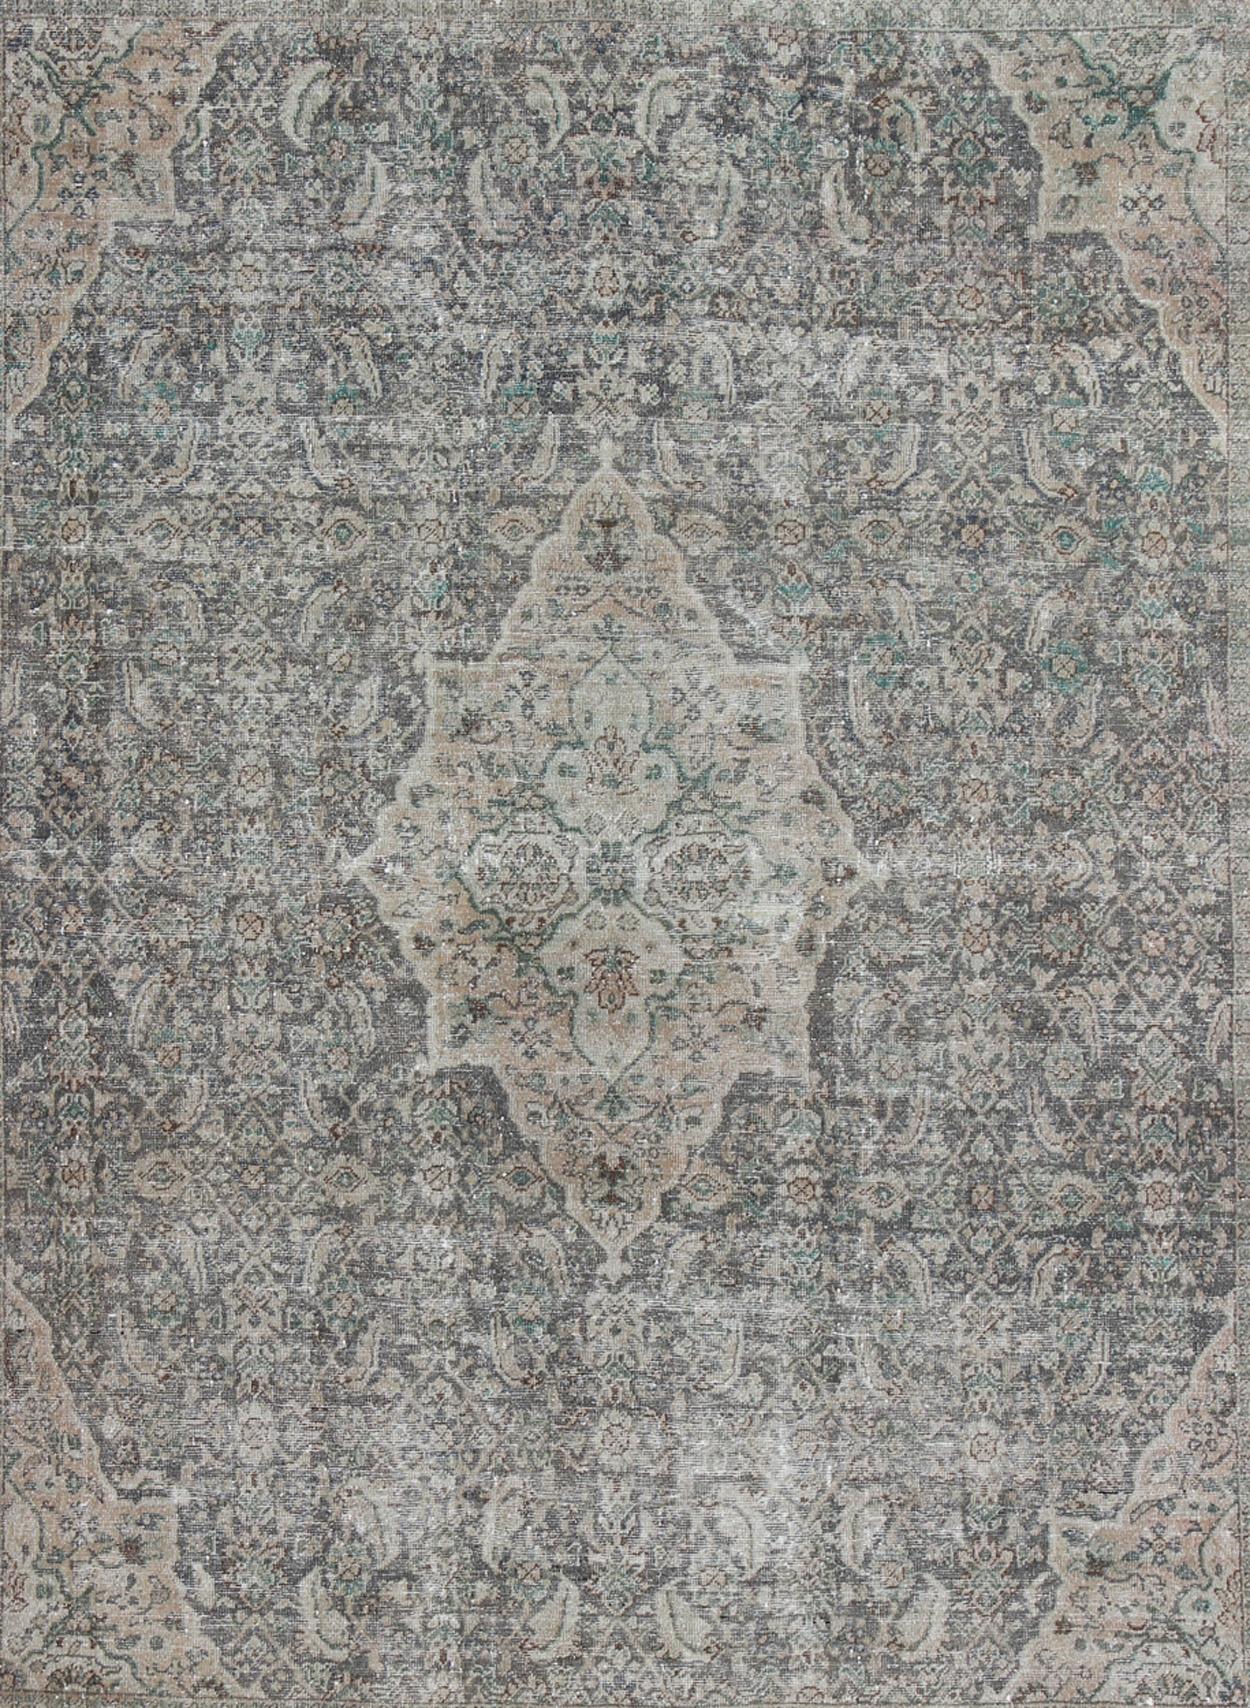 Wool Antique Distressed Persian Mahal/Sultanabad Rug in Light Gray, Blush/Pink For Sale